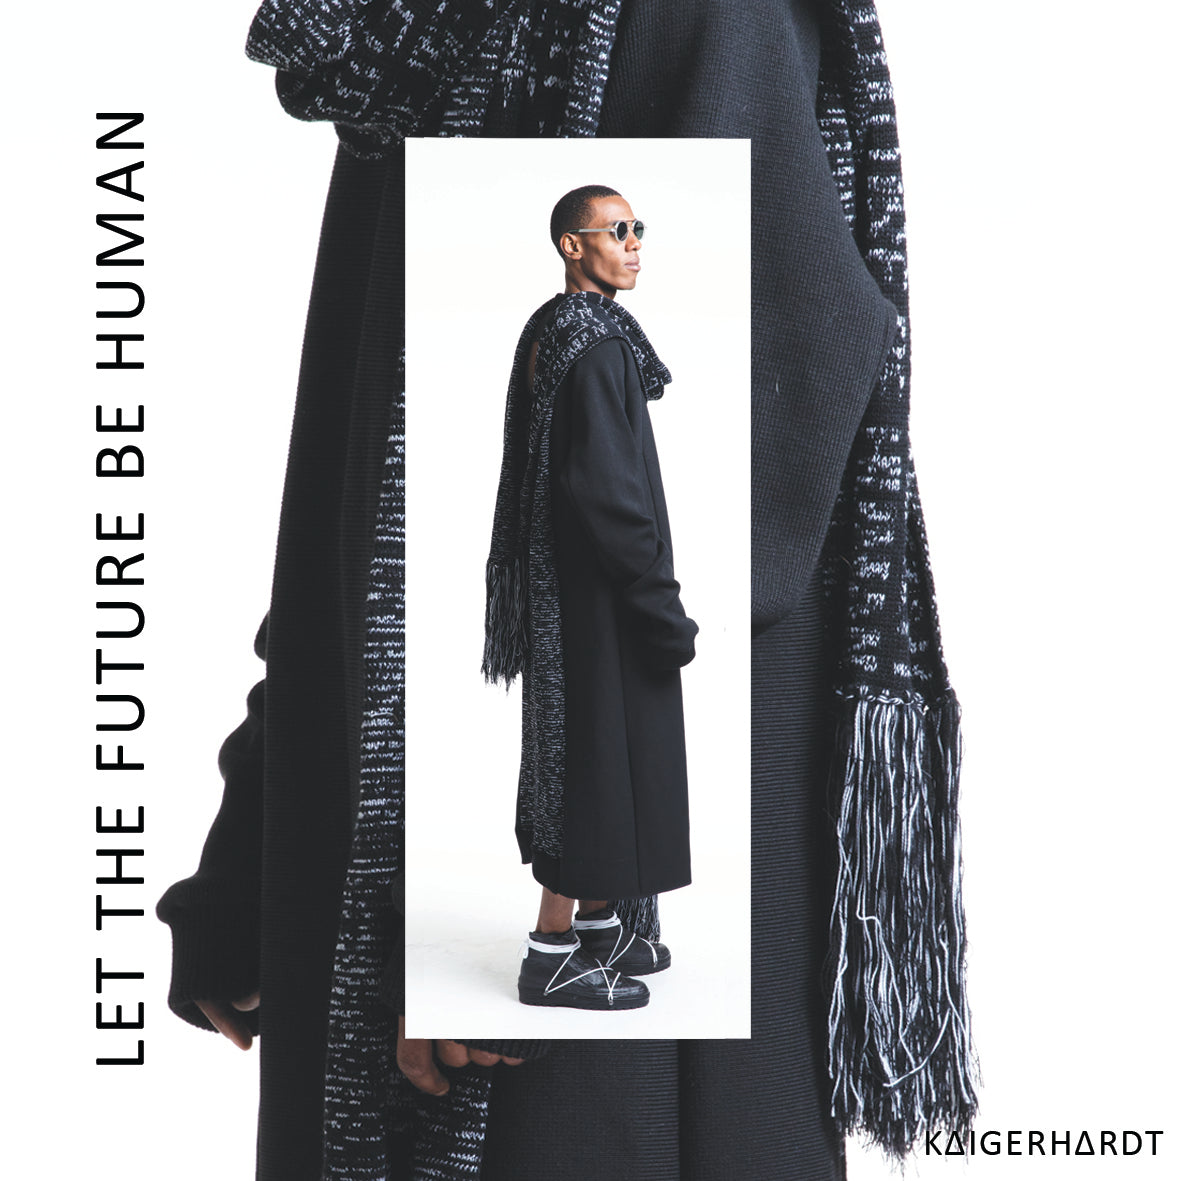 A man wears a black dress in heavy knit with an insert scarf piec in black and whit knit with letters which says LET THE FUTURE BE HUMAN. The man is a people of color and wears also sunglasses and black shoes with white shoelace.